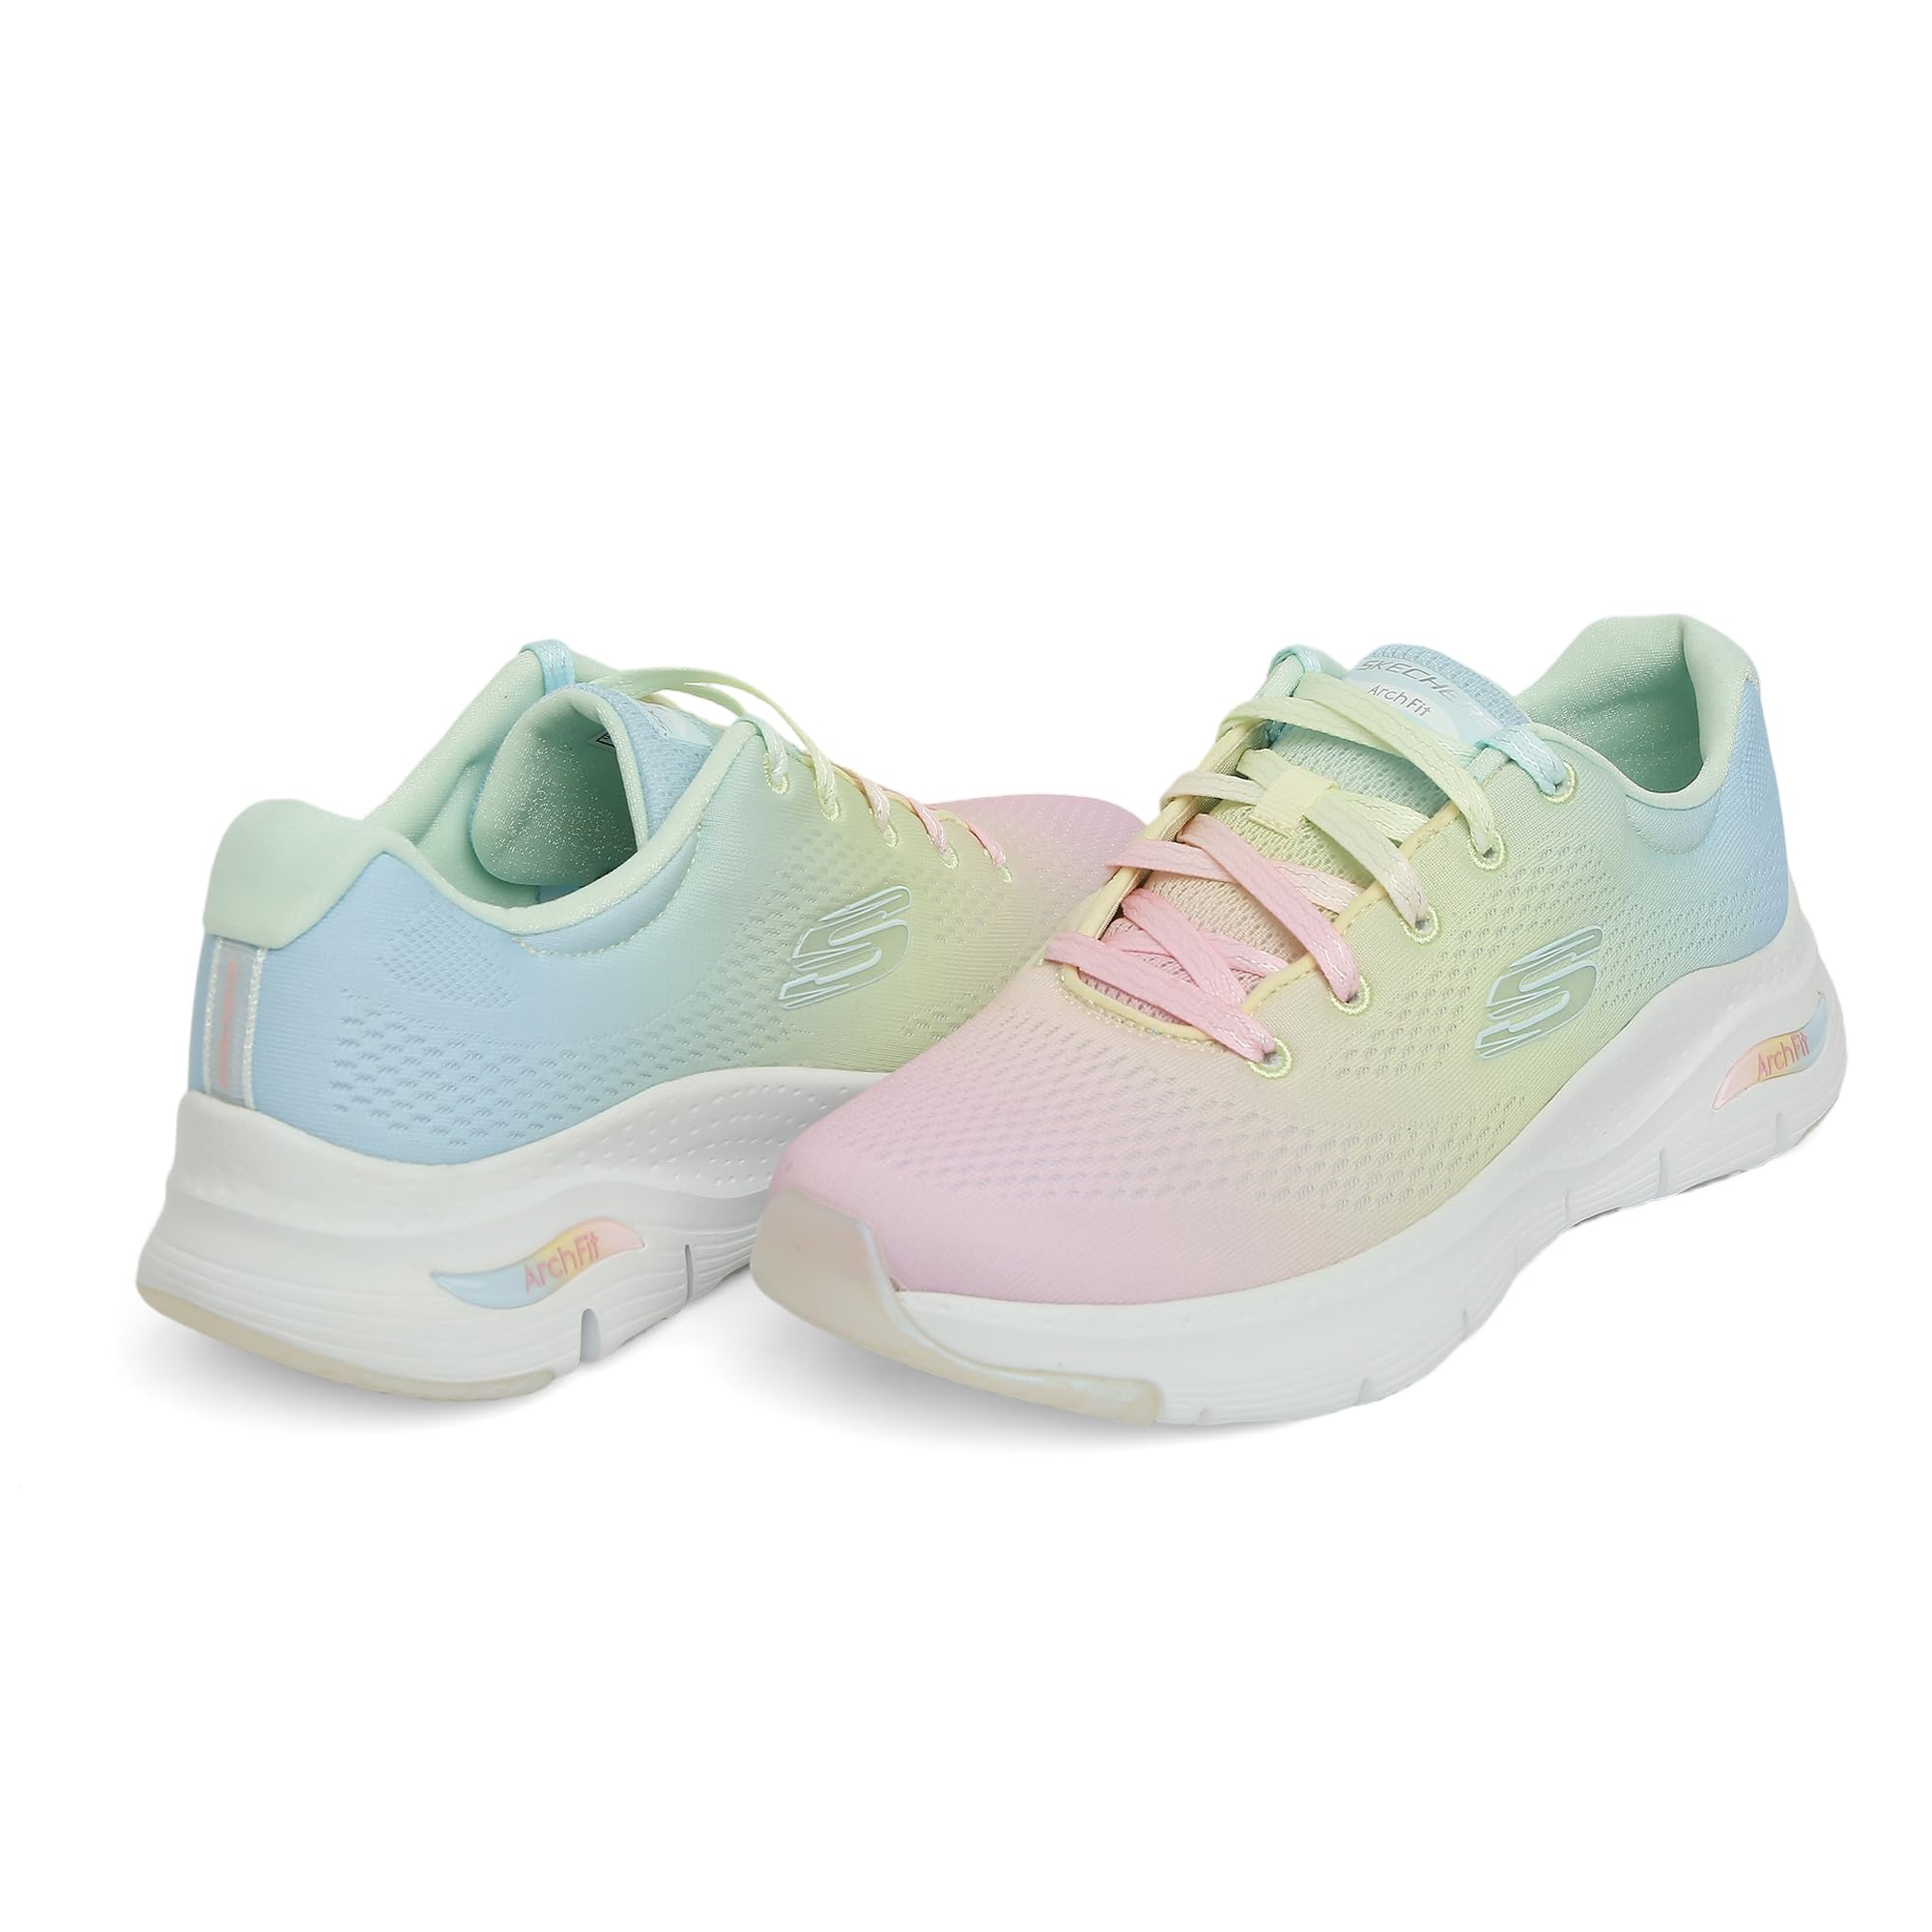 Skechers-Womens-Arch FIT-Dreamy Day -Sneakers, Multicolor, 5 UK (8 US)